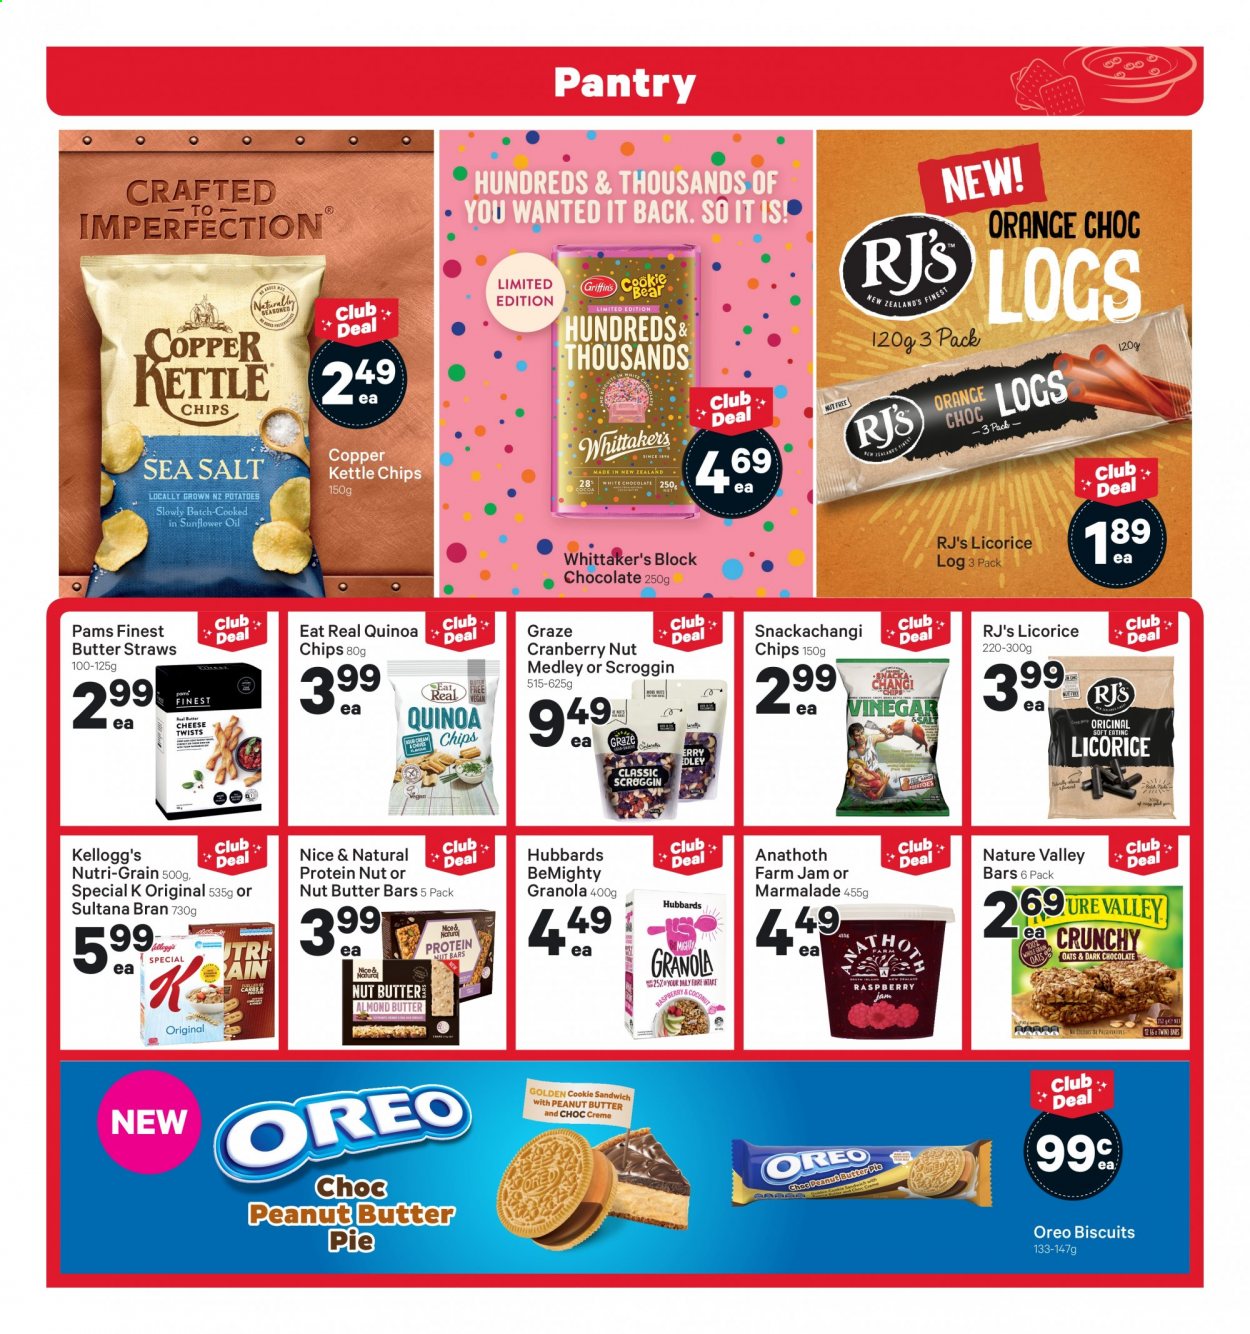 thumbnail - New World mailer - 22.02.2021 - 28.02.2021 - Sales products - pie, potatoes, oranges, coconut, sandwich, cheese, Oreo, almond butter, sour cream, white chocolate, chocolate, Kellogg's, biscuit, dark chocolate, Whittaker's, chips, snack, Copper Kettle, cocoa, oats, sea salt, granola, nut bar, Nature Valley, quinoa, sunflower oil, fruit jam, peanut butter, nut butter, almonds, Graze. Page 13.